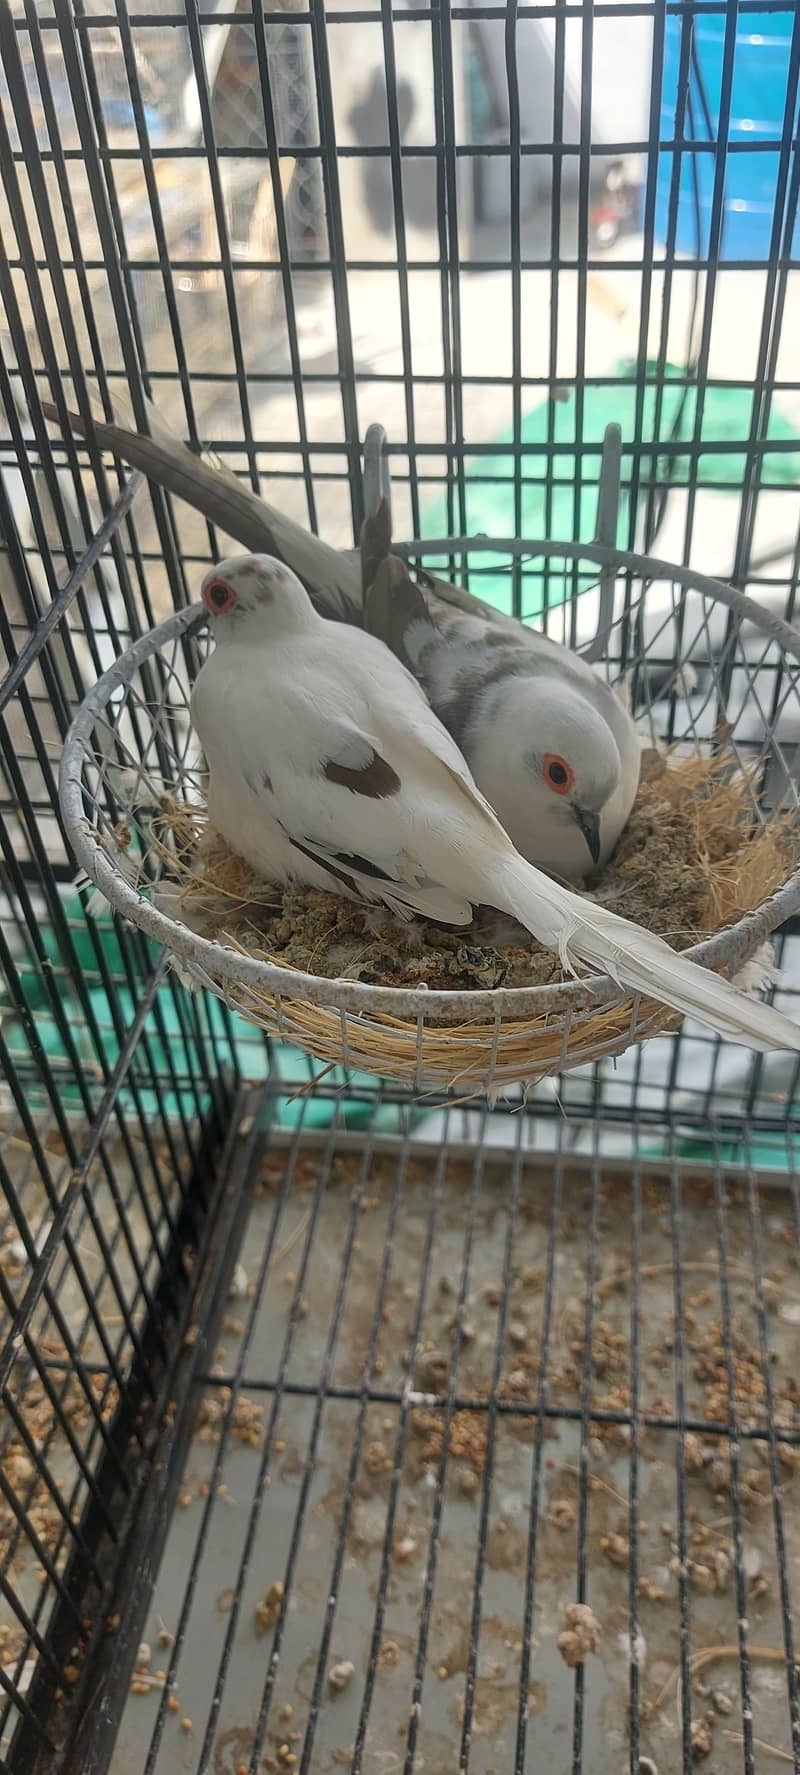 High quality Diamond pied dove breeder setup patha and ready to breed 9